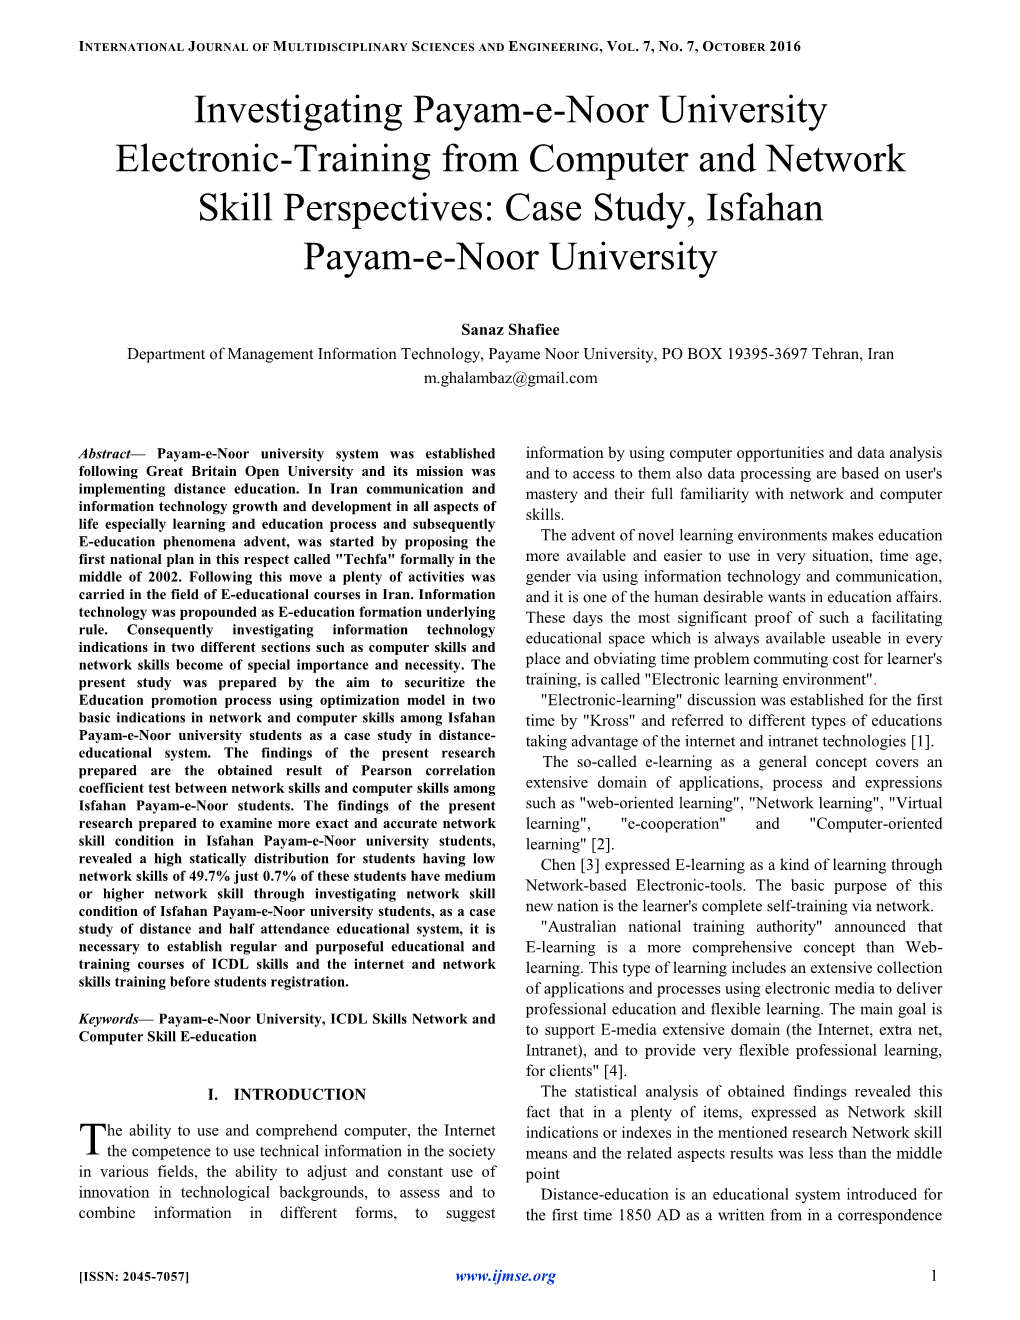 Investigating Payam-E-Noor University Electronic-Training from Computer and Network Skill Perspectives: Case Study, Isfahan Payam-E-Noor University